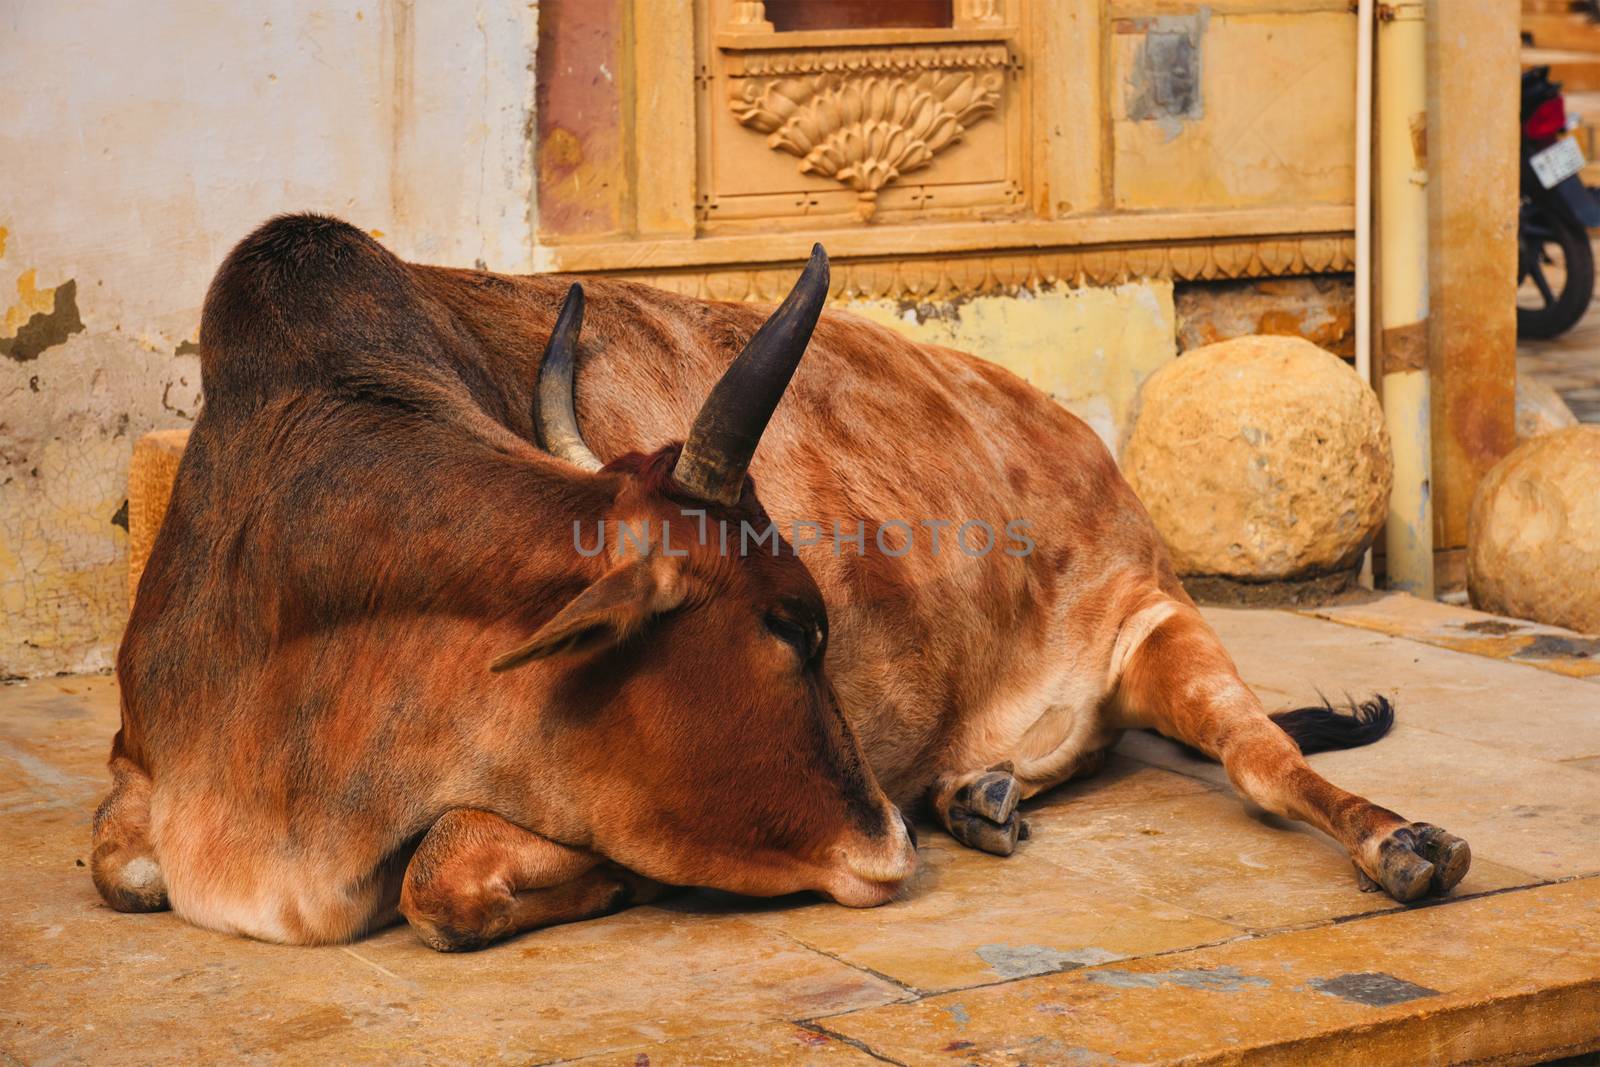 Indian cow resting in the street by dimol